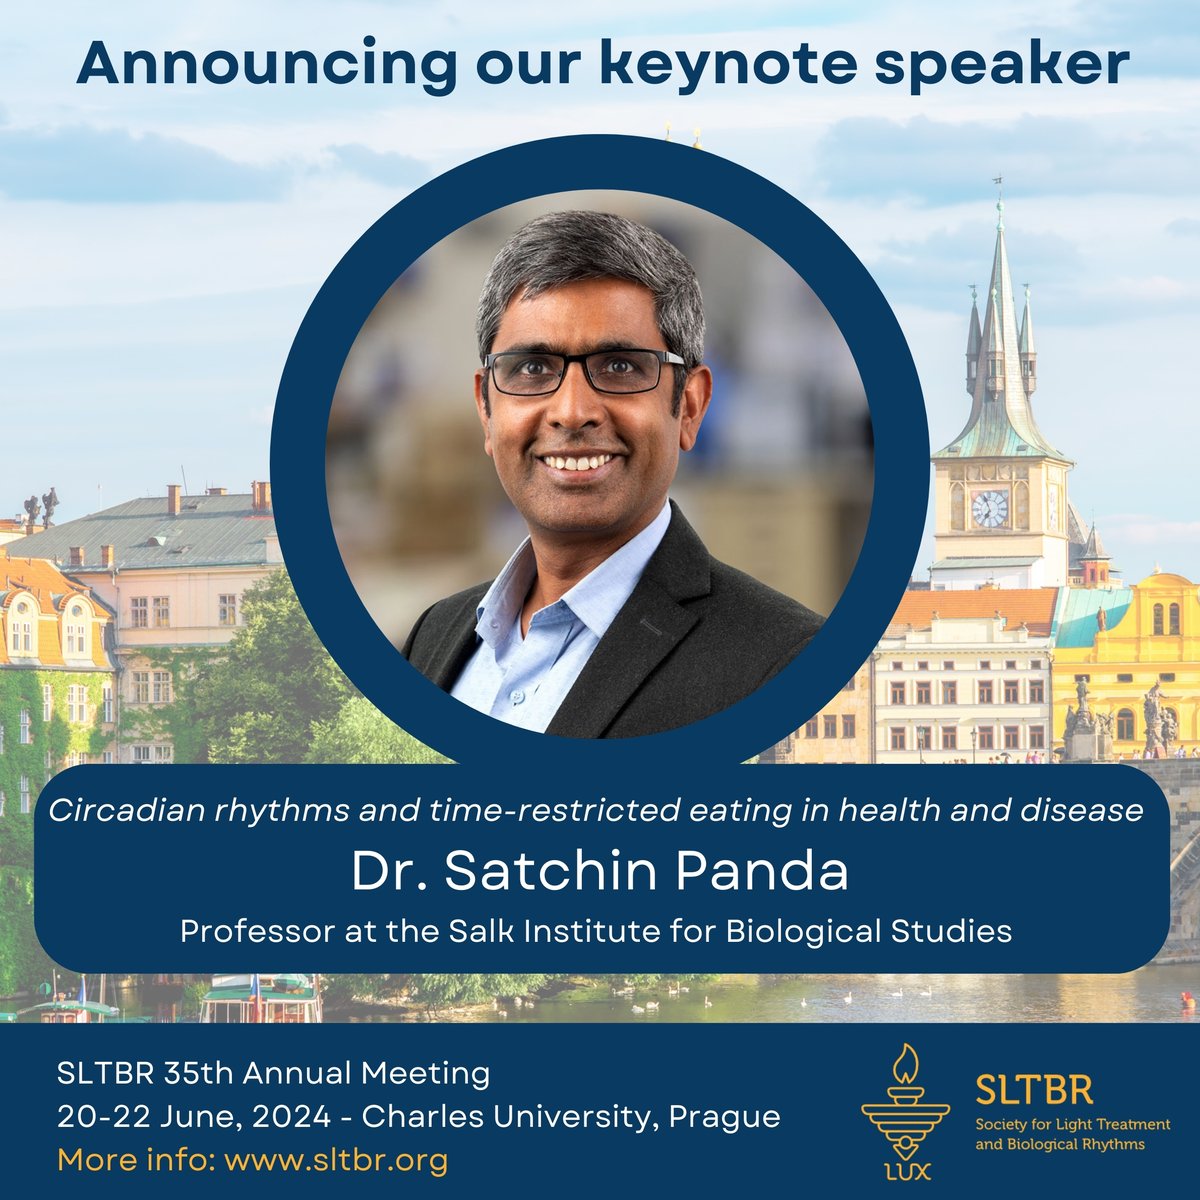 🌟Thrilled to announce Dr. Satchin Panda as our keynote speaker for the SLTBR 35th Annual Meeting!🎉 Don't miss this chance to hear from a top expert on 'Circadian Rhythms and Time-Restricted Eating in Health and Disease.' Stay tuned for updates: sltbr.org